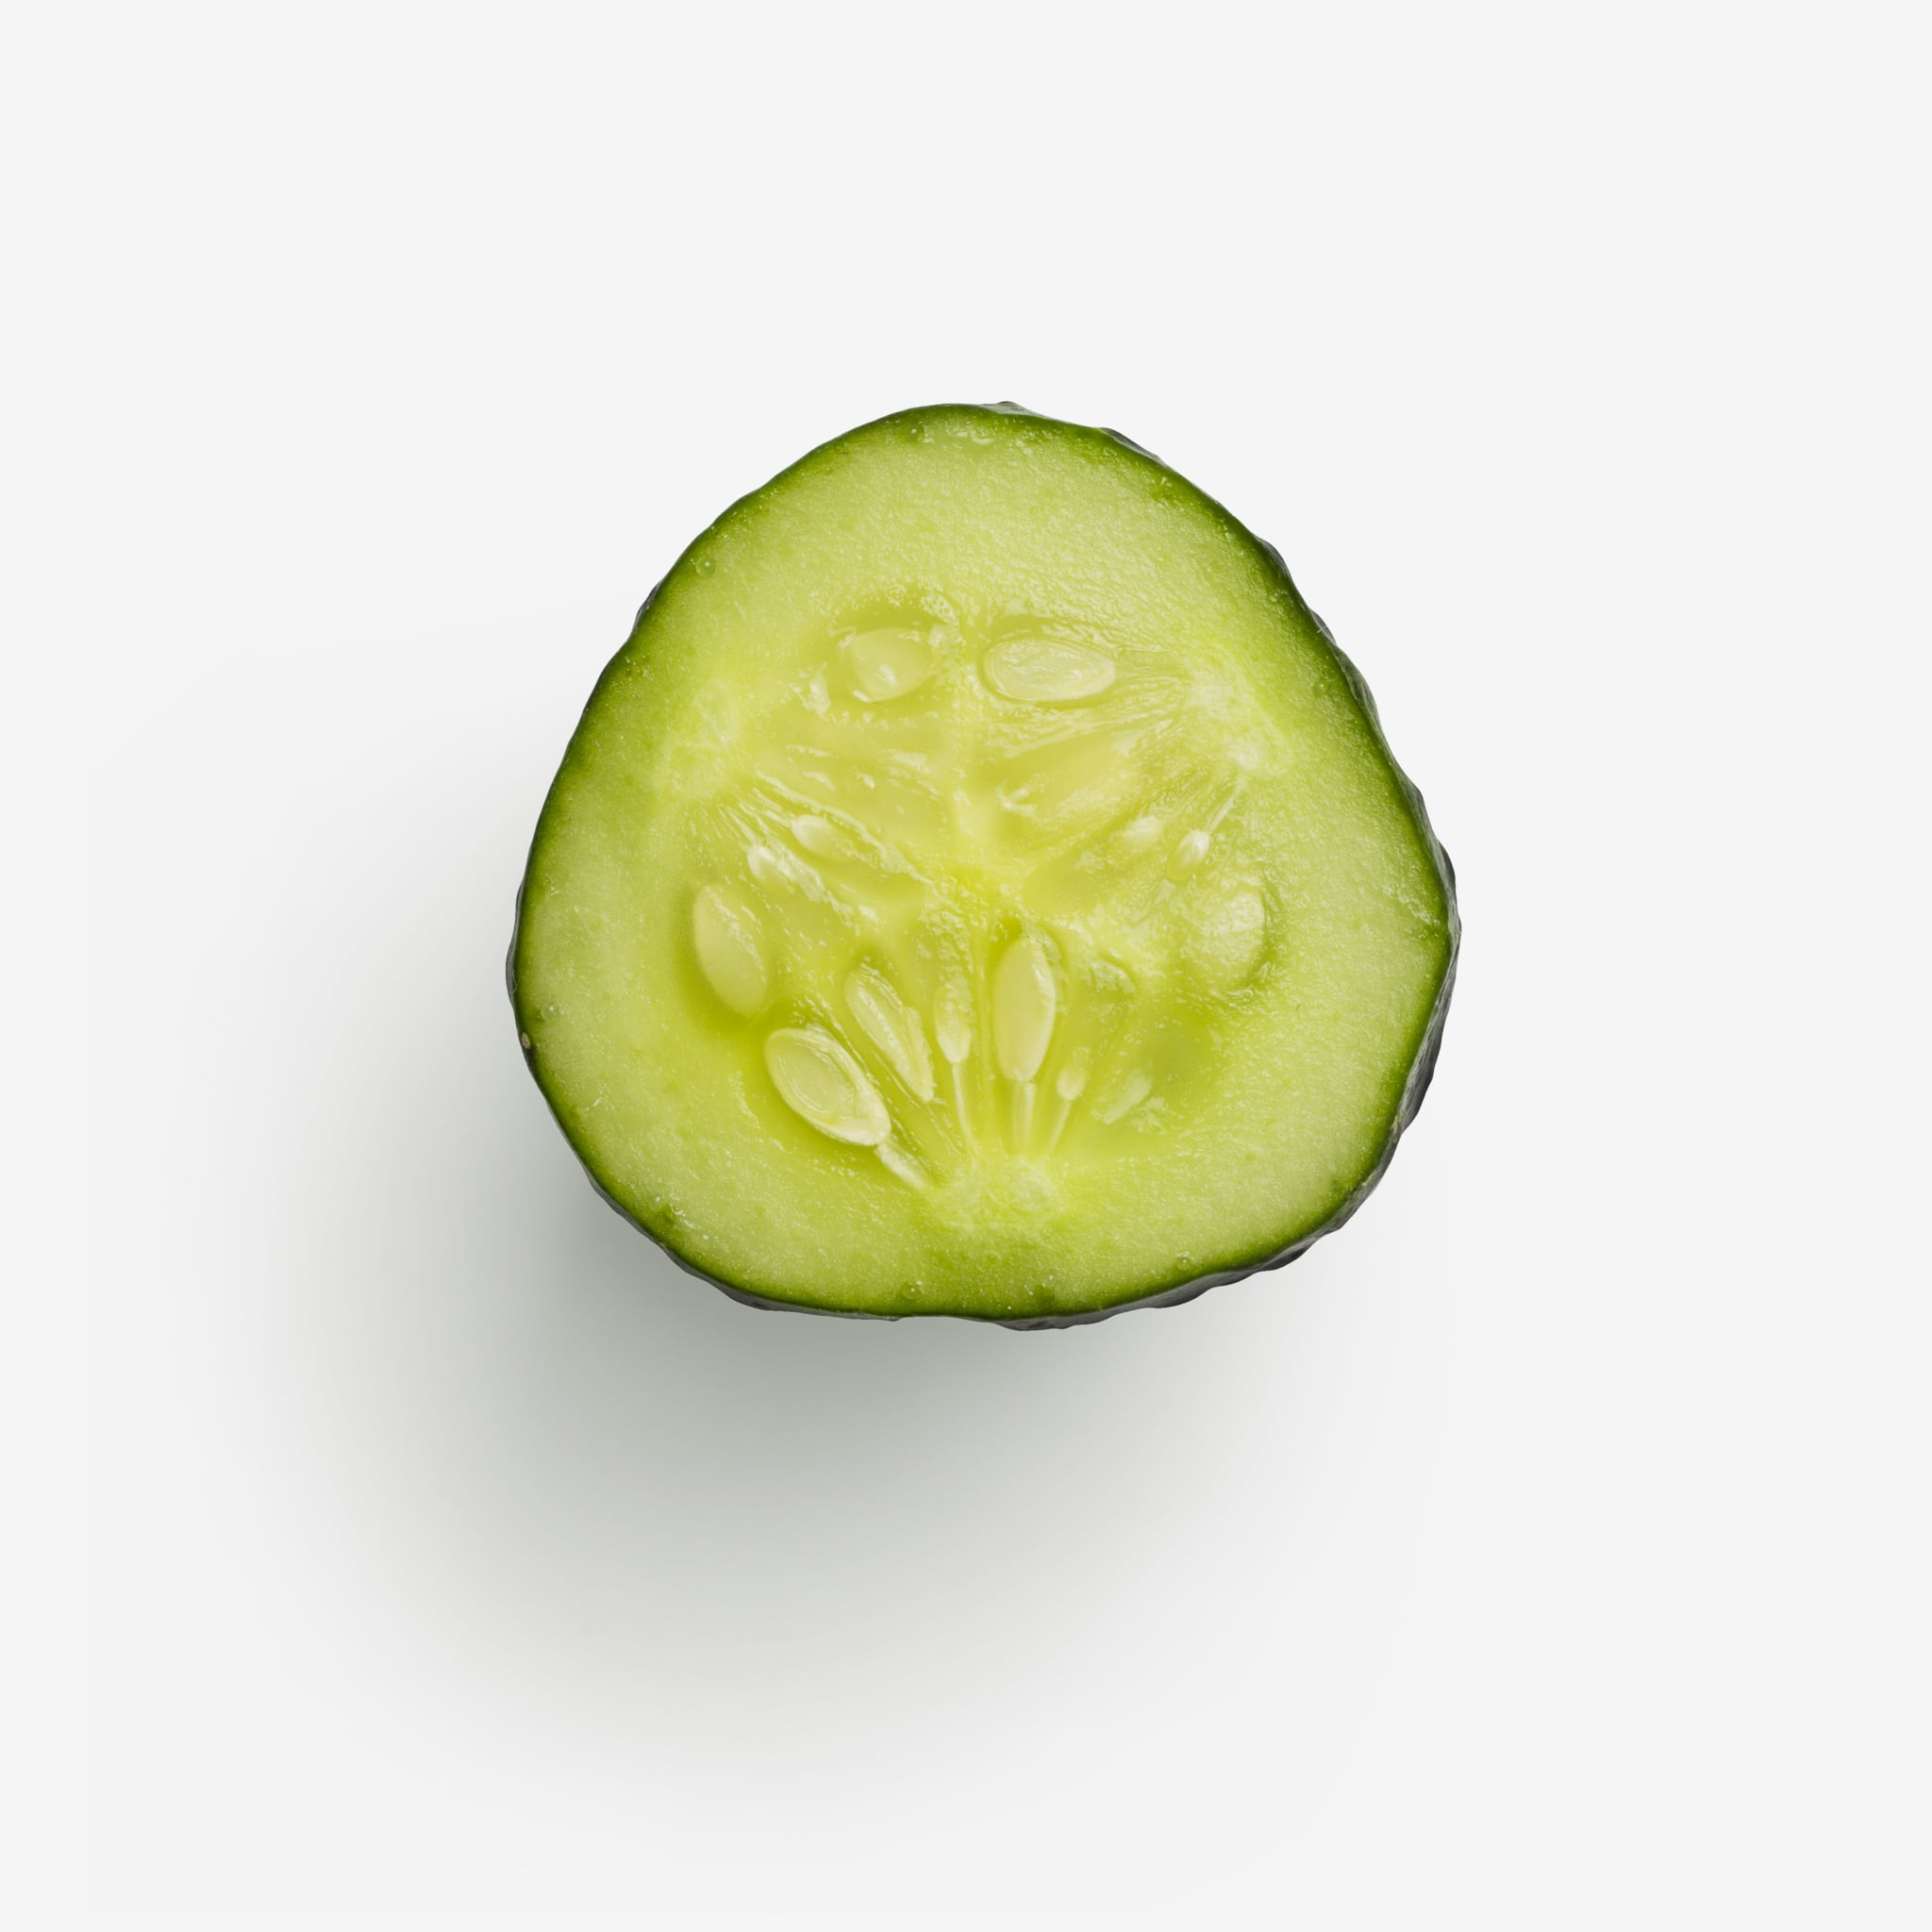 Cucumber image with transparent background